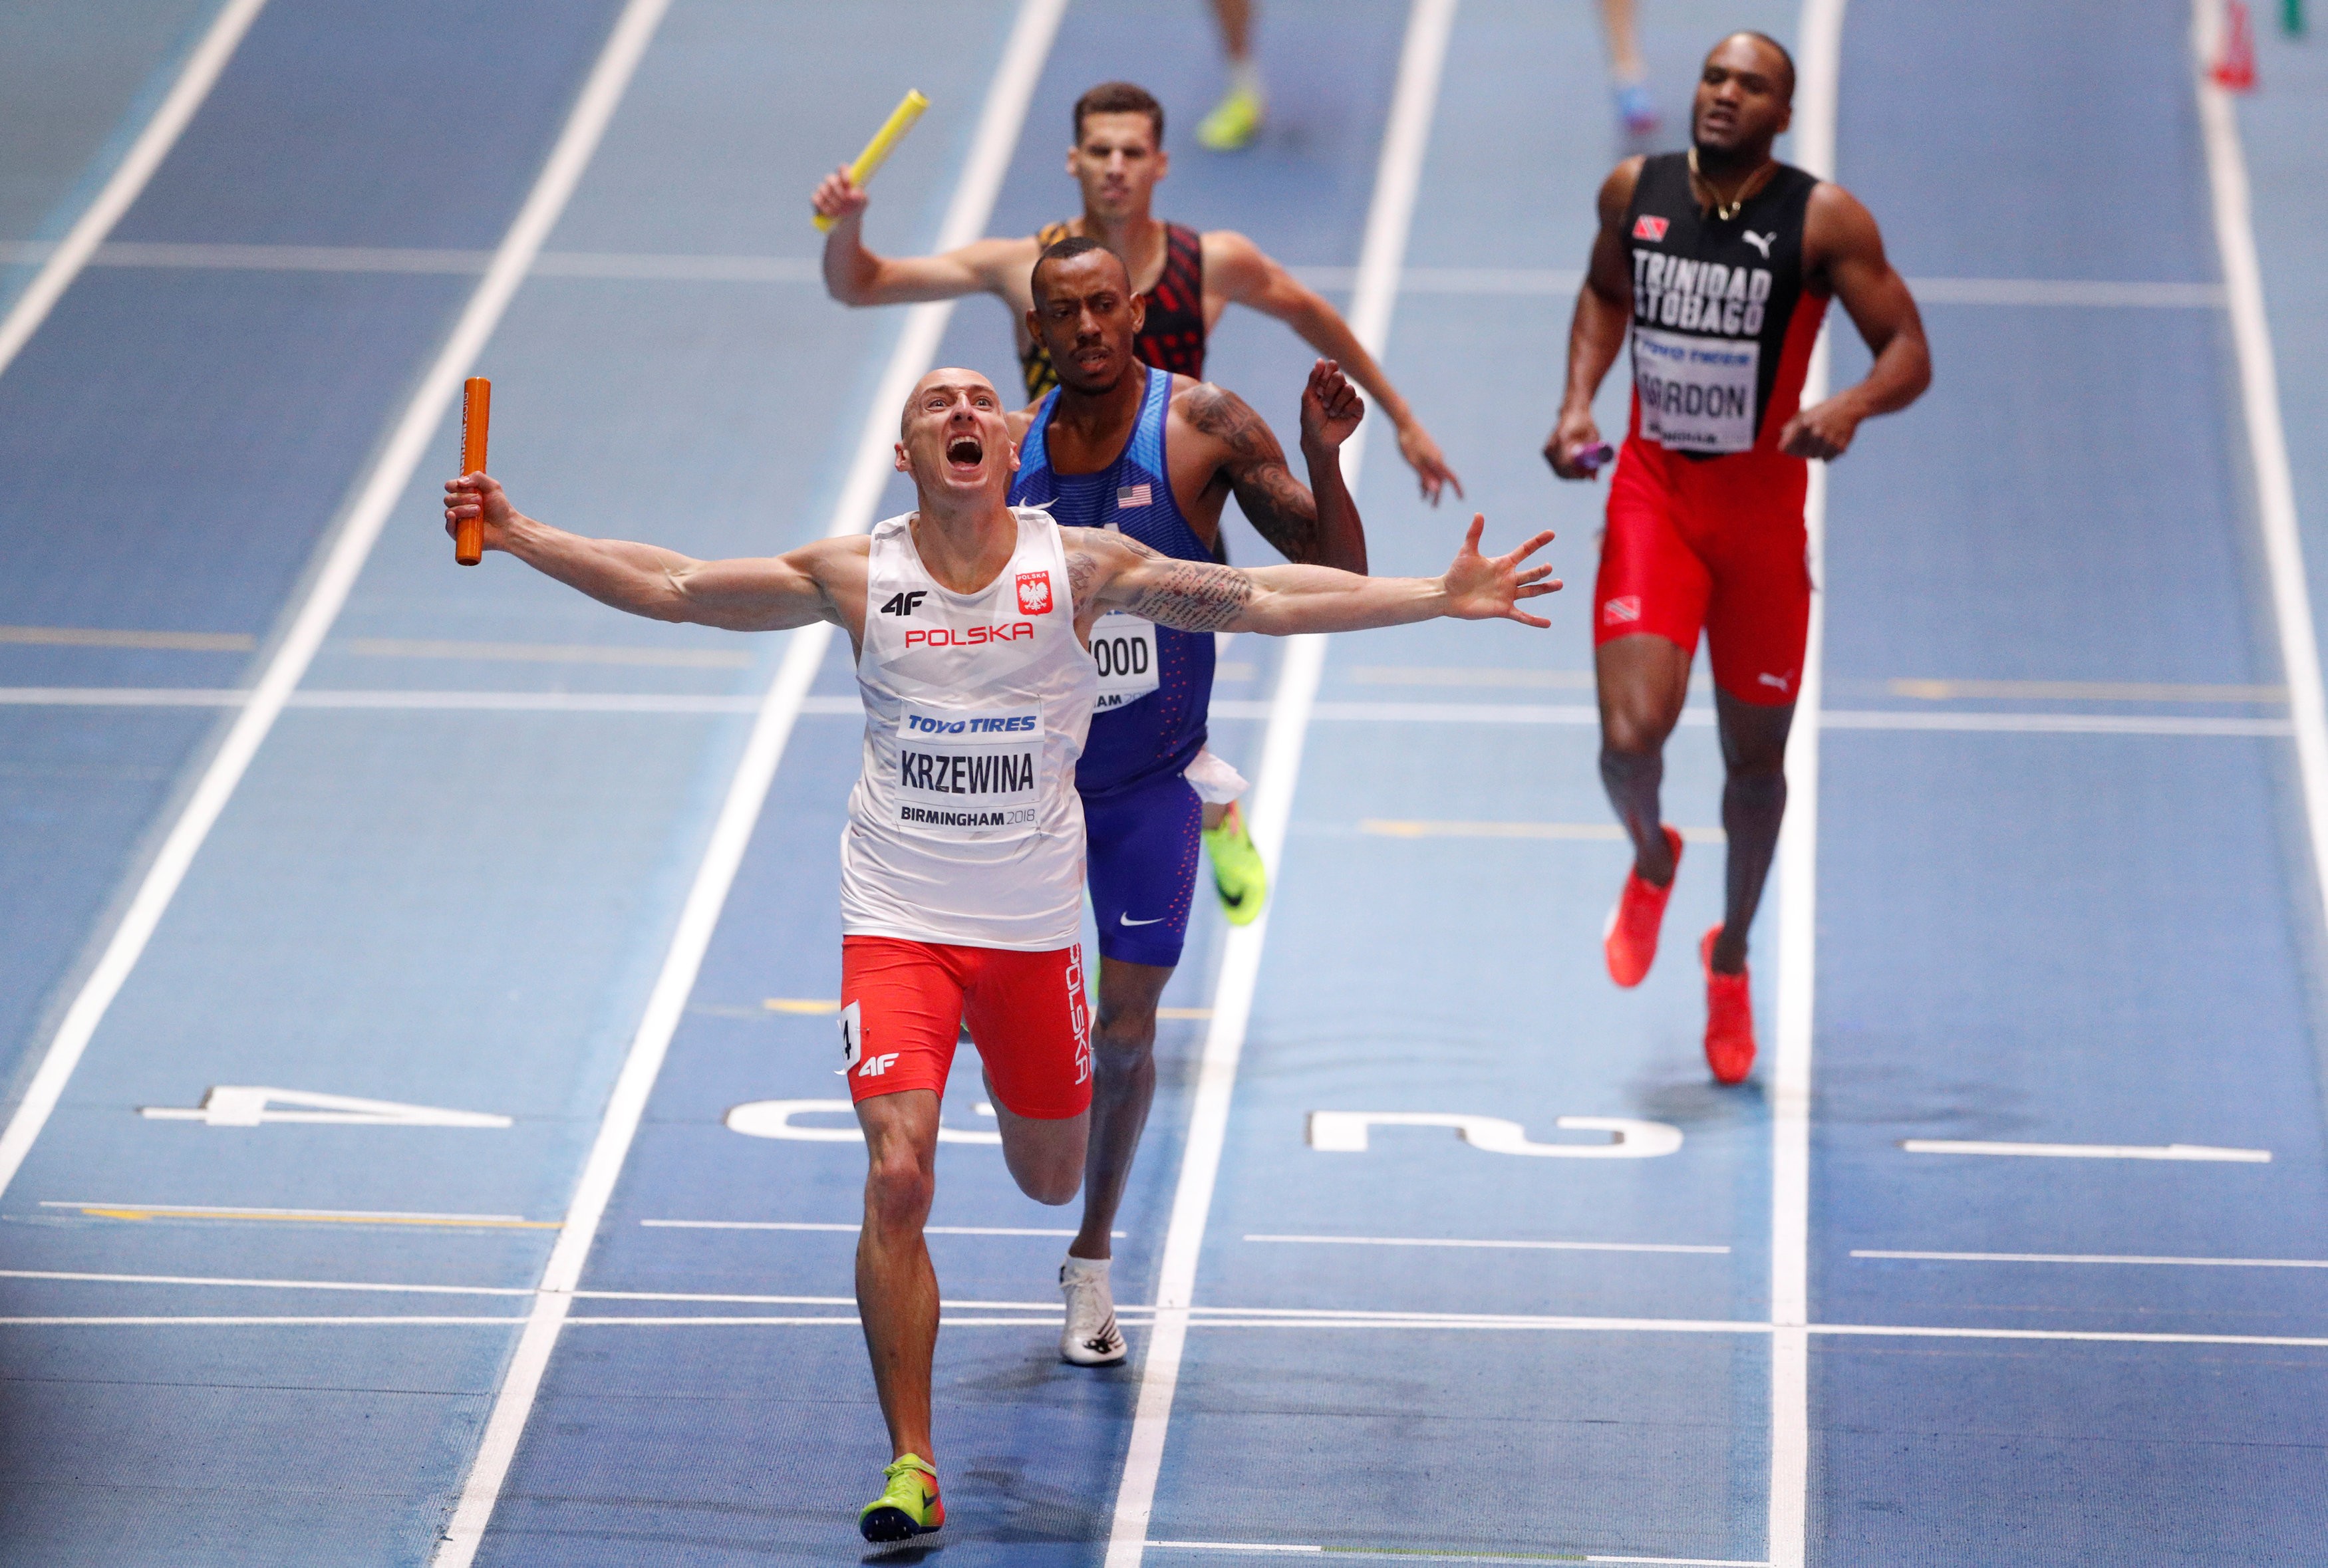 Jakub Krzewina of Poland celebrates winning the men's 4x400 metres relay at the IAAF World Indoor Championships in 2018. Photo: Reuters